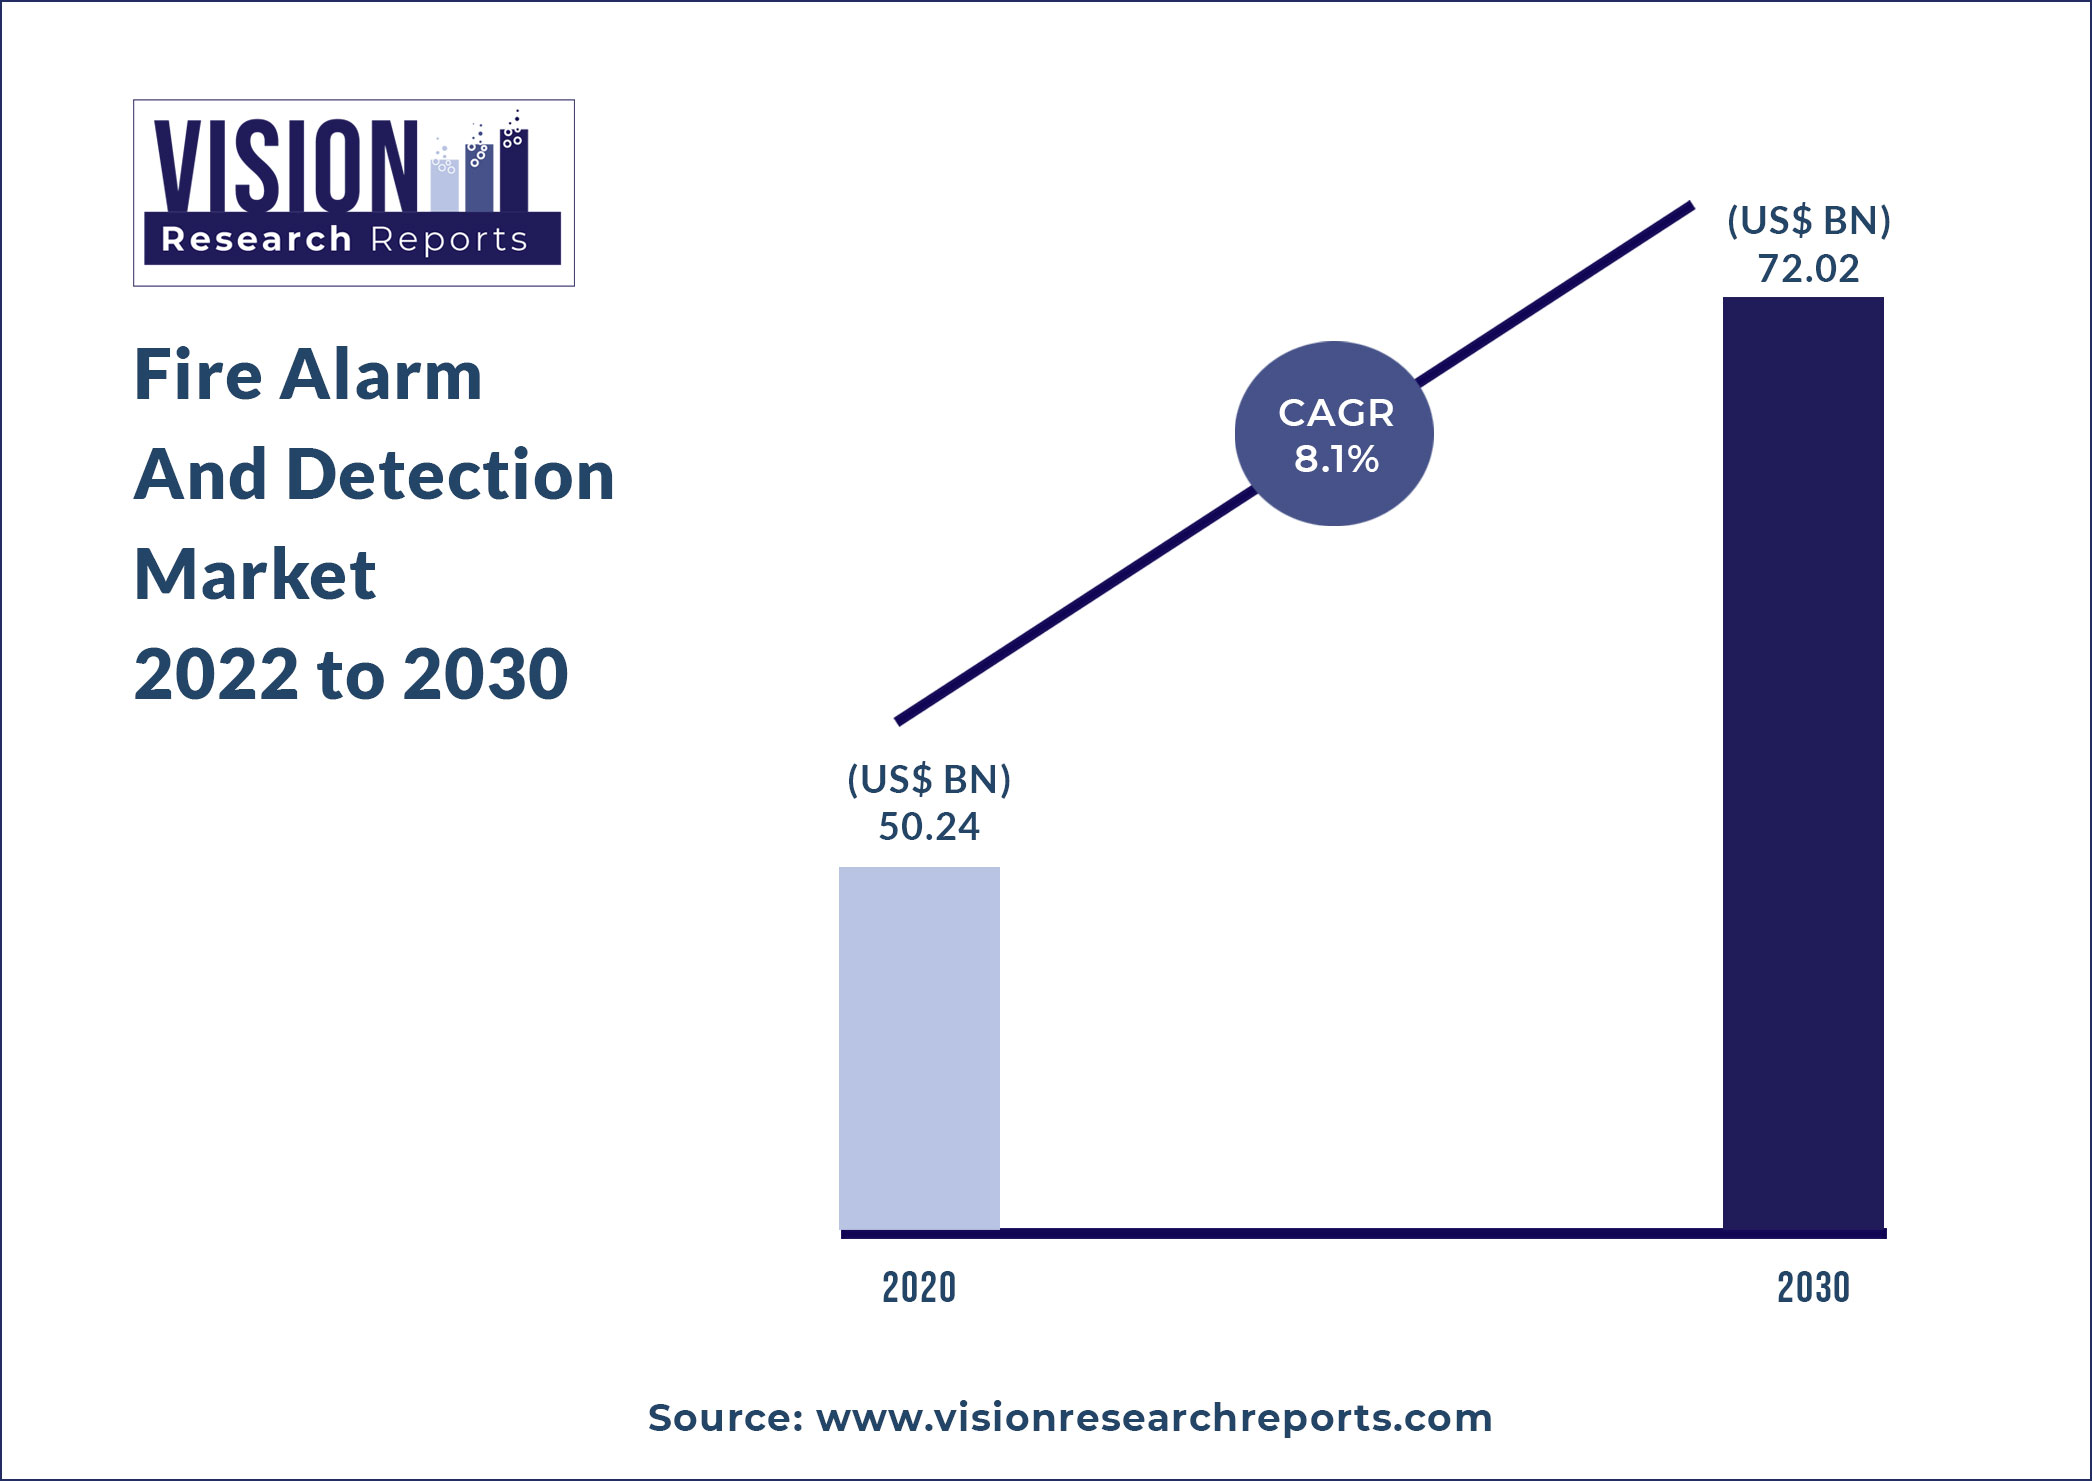 Fire Alarm And Detection Market Size 2022 to 2030